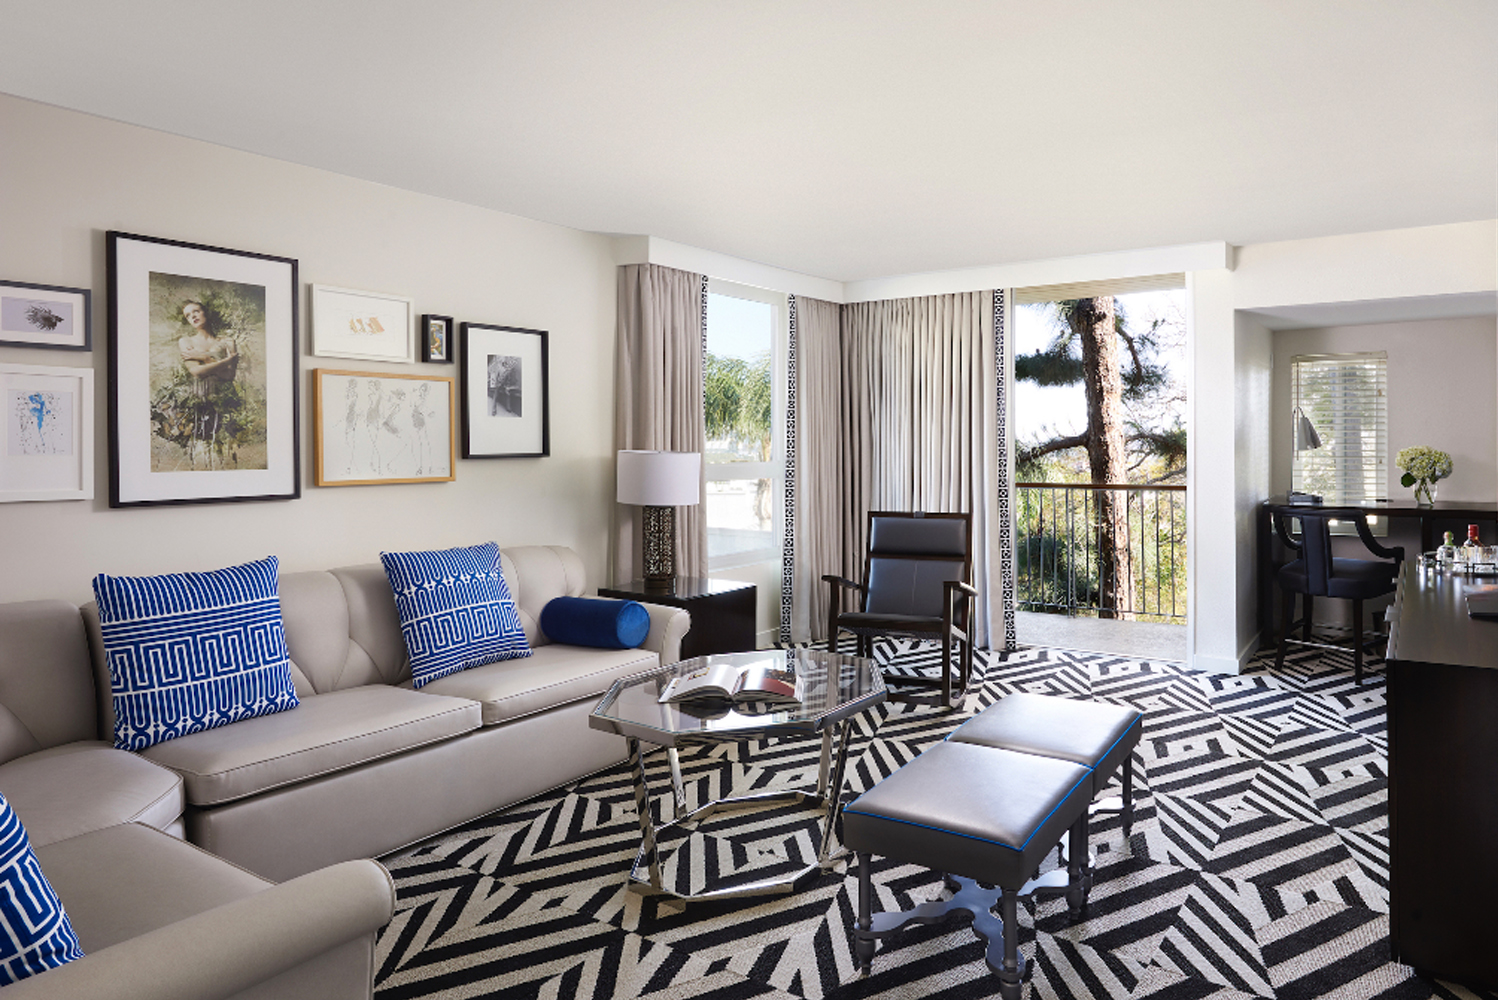 How Hollywood glamour and fashion inspired Chamberlain West Hollywoods redesign